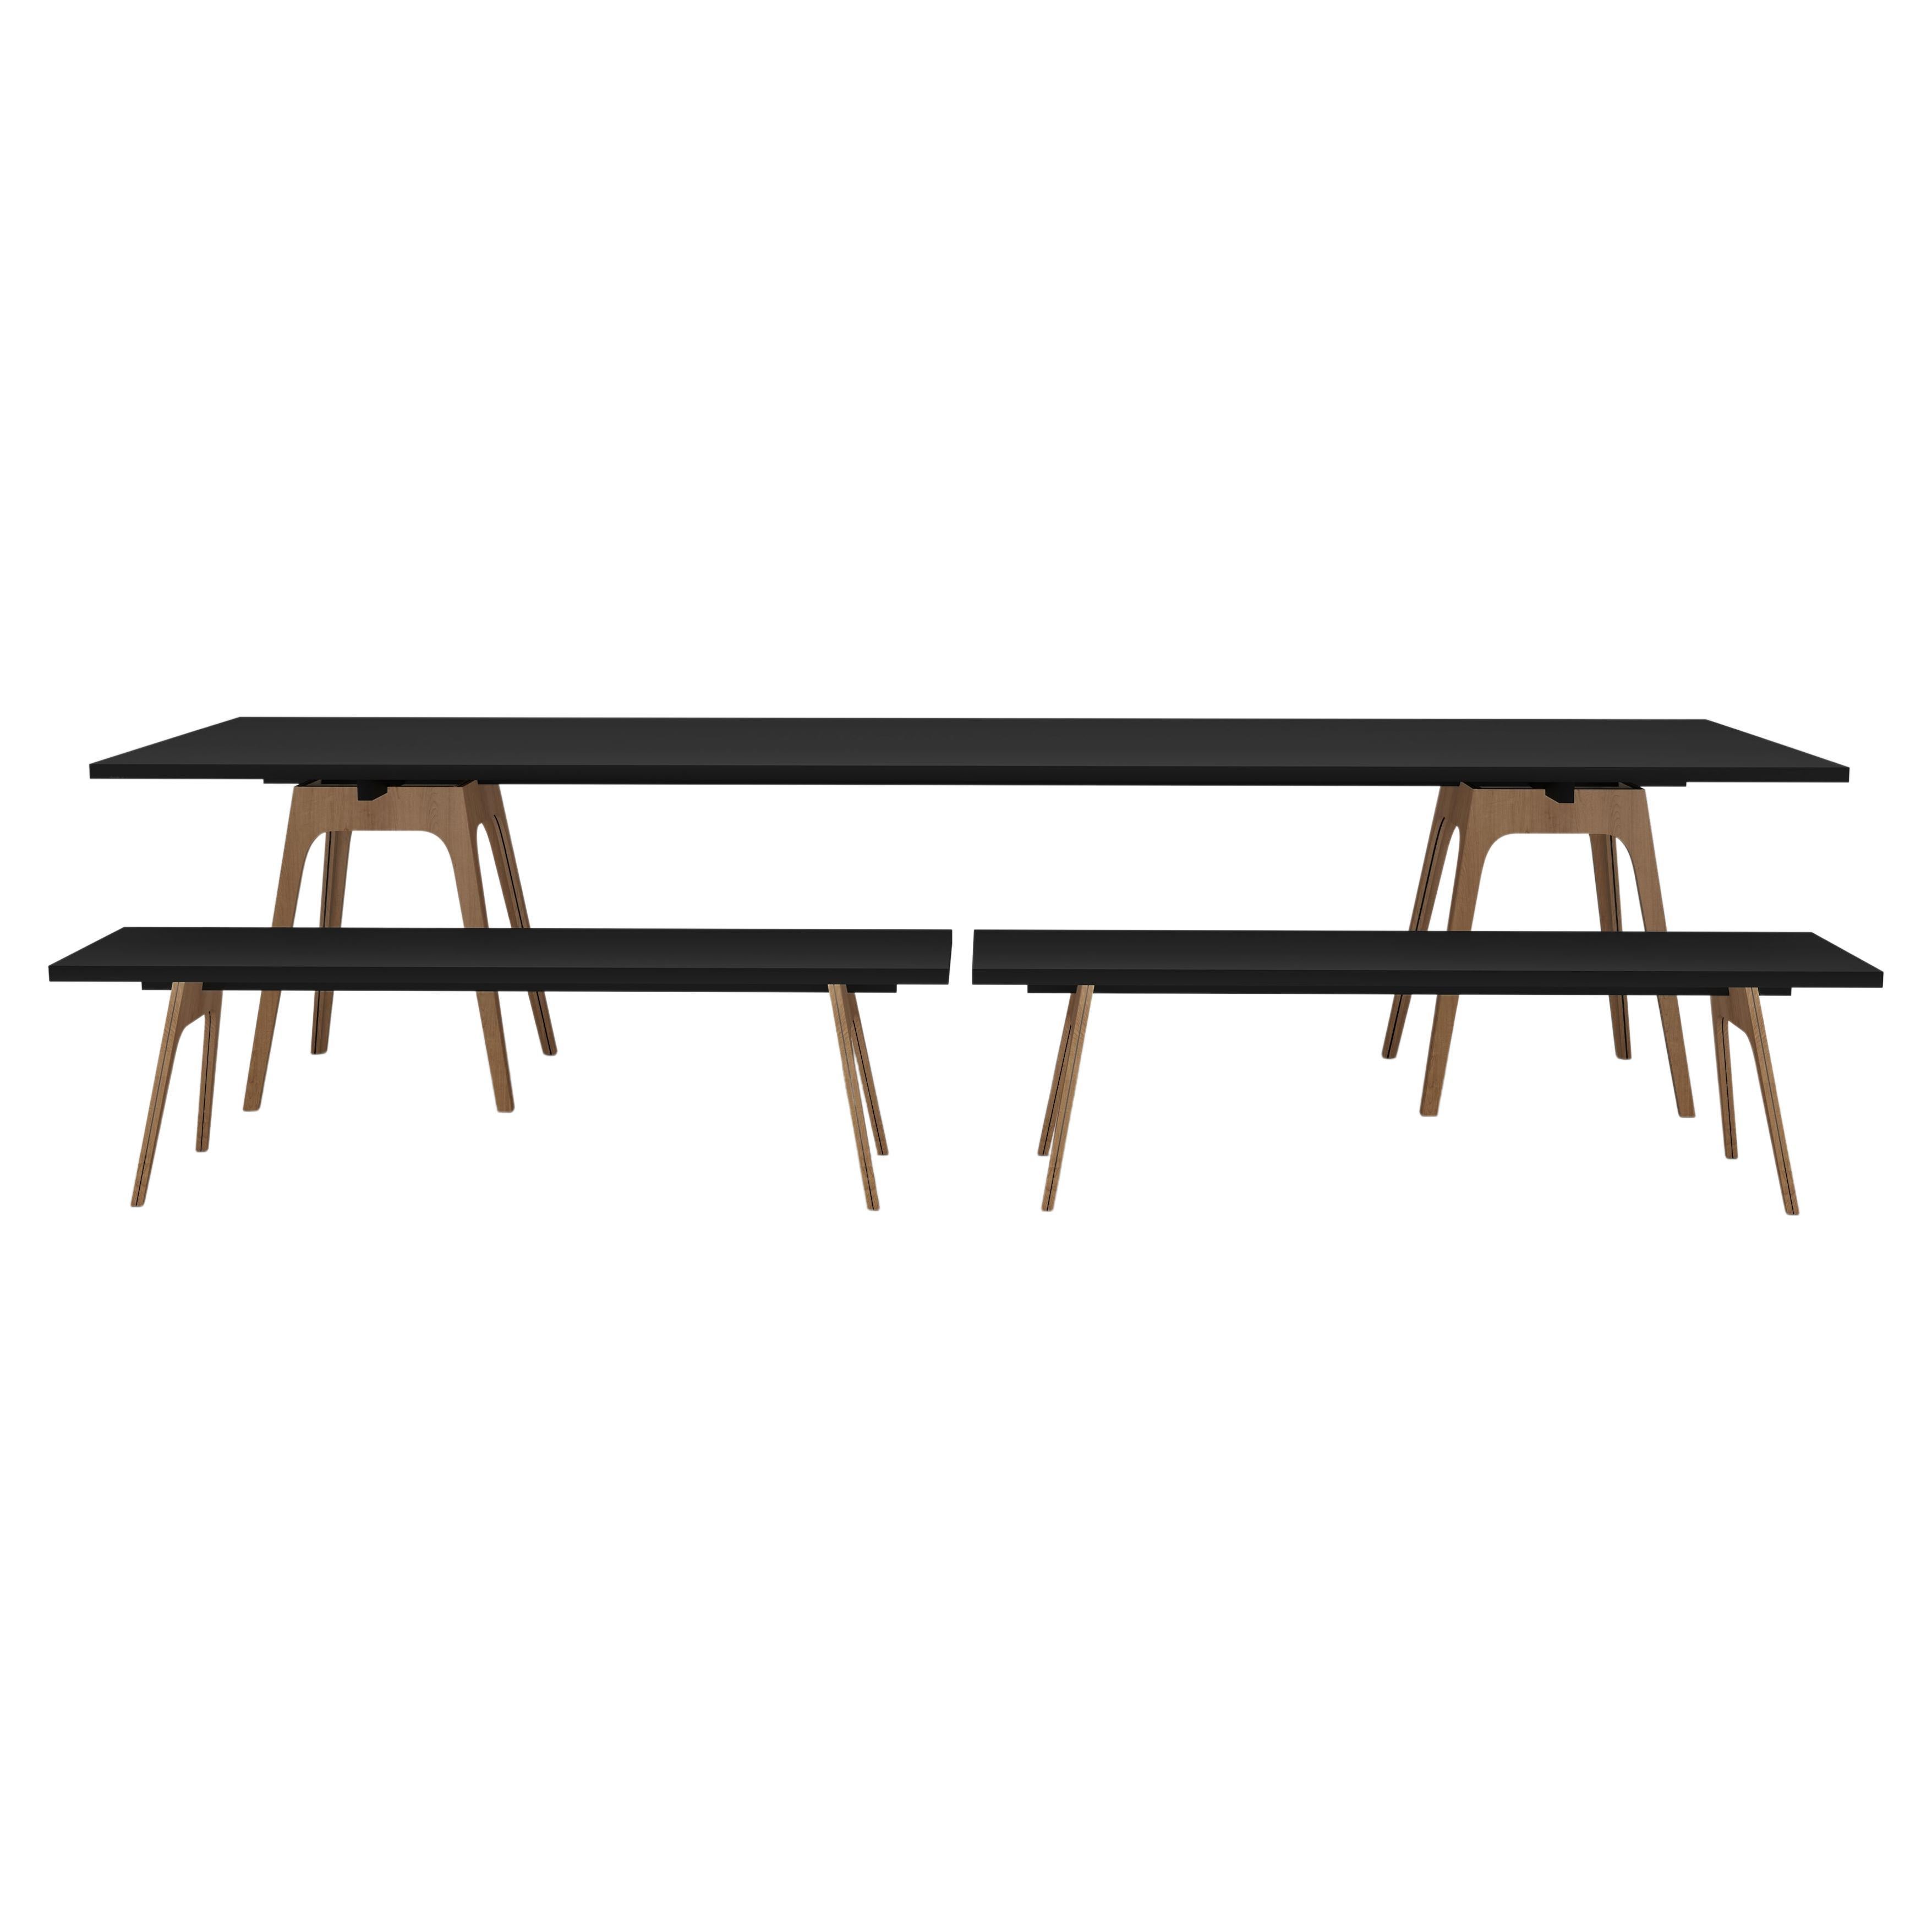 Set of 3 Marina Black Dining Table and Benches by Cools Collection For Sale